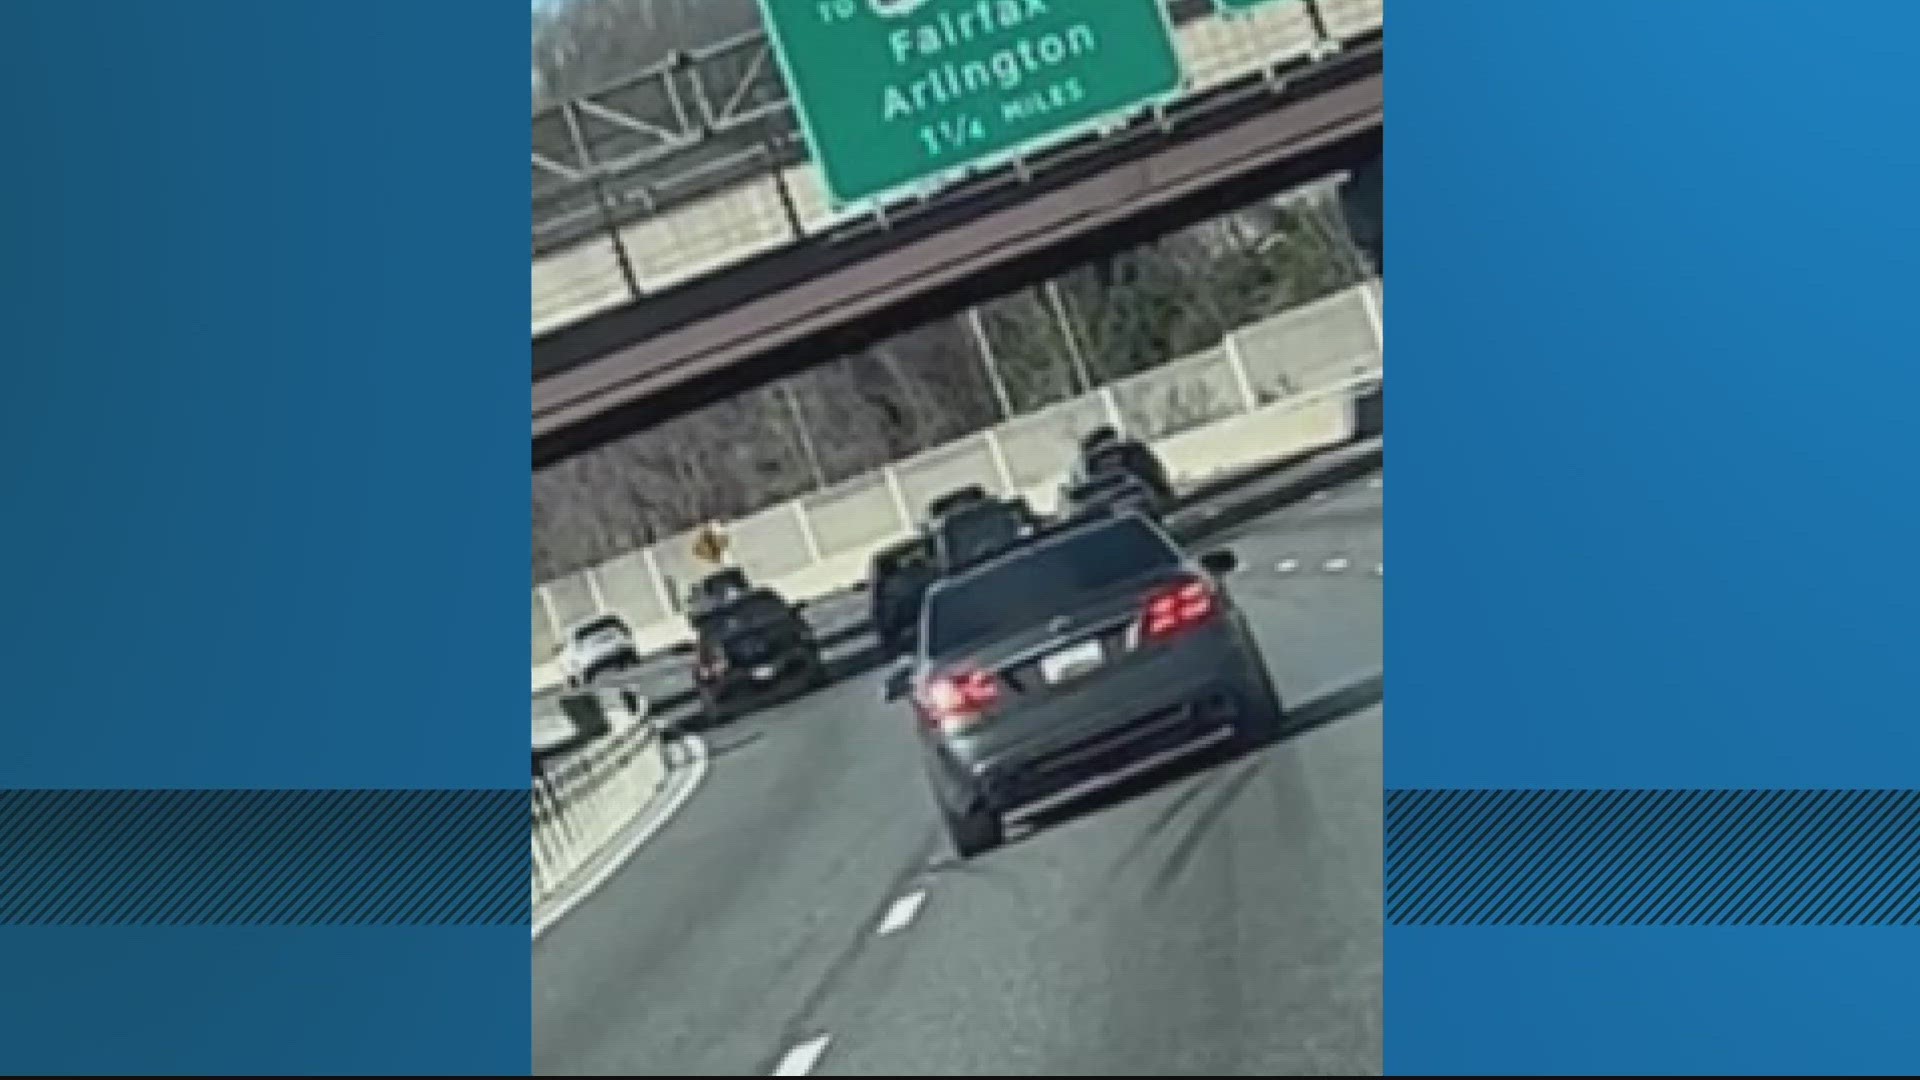 Virginia State Police is asking for the public's help finding a vehicle that was reportedly used during a shooting on Interstate 495 on Sunday.